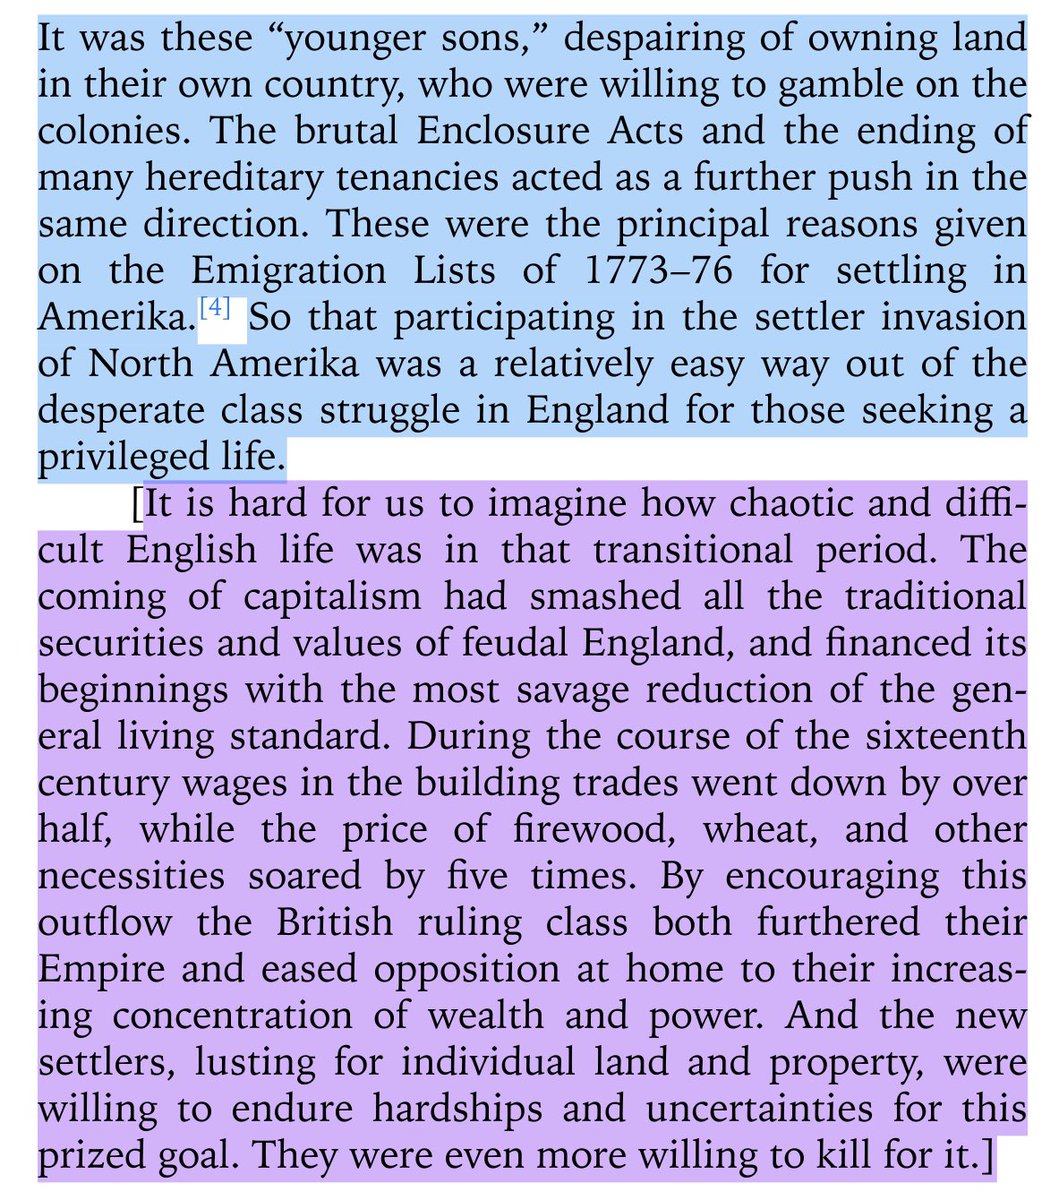 “these were the principal reasons given on the emigration lists of 1773–76 for settling in amerika. so that participating in the settler invasion of north amerika was a relatively easy way out of the desperate class struggle in england for those seeking a privileged life.”